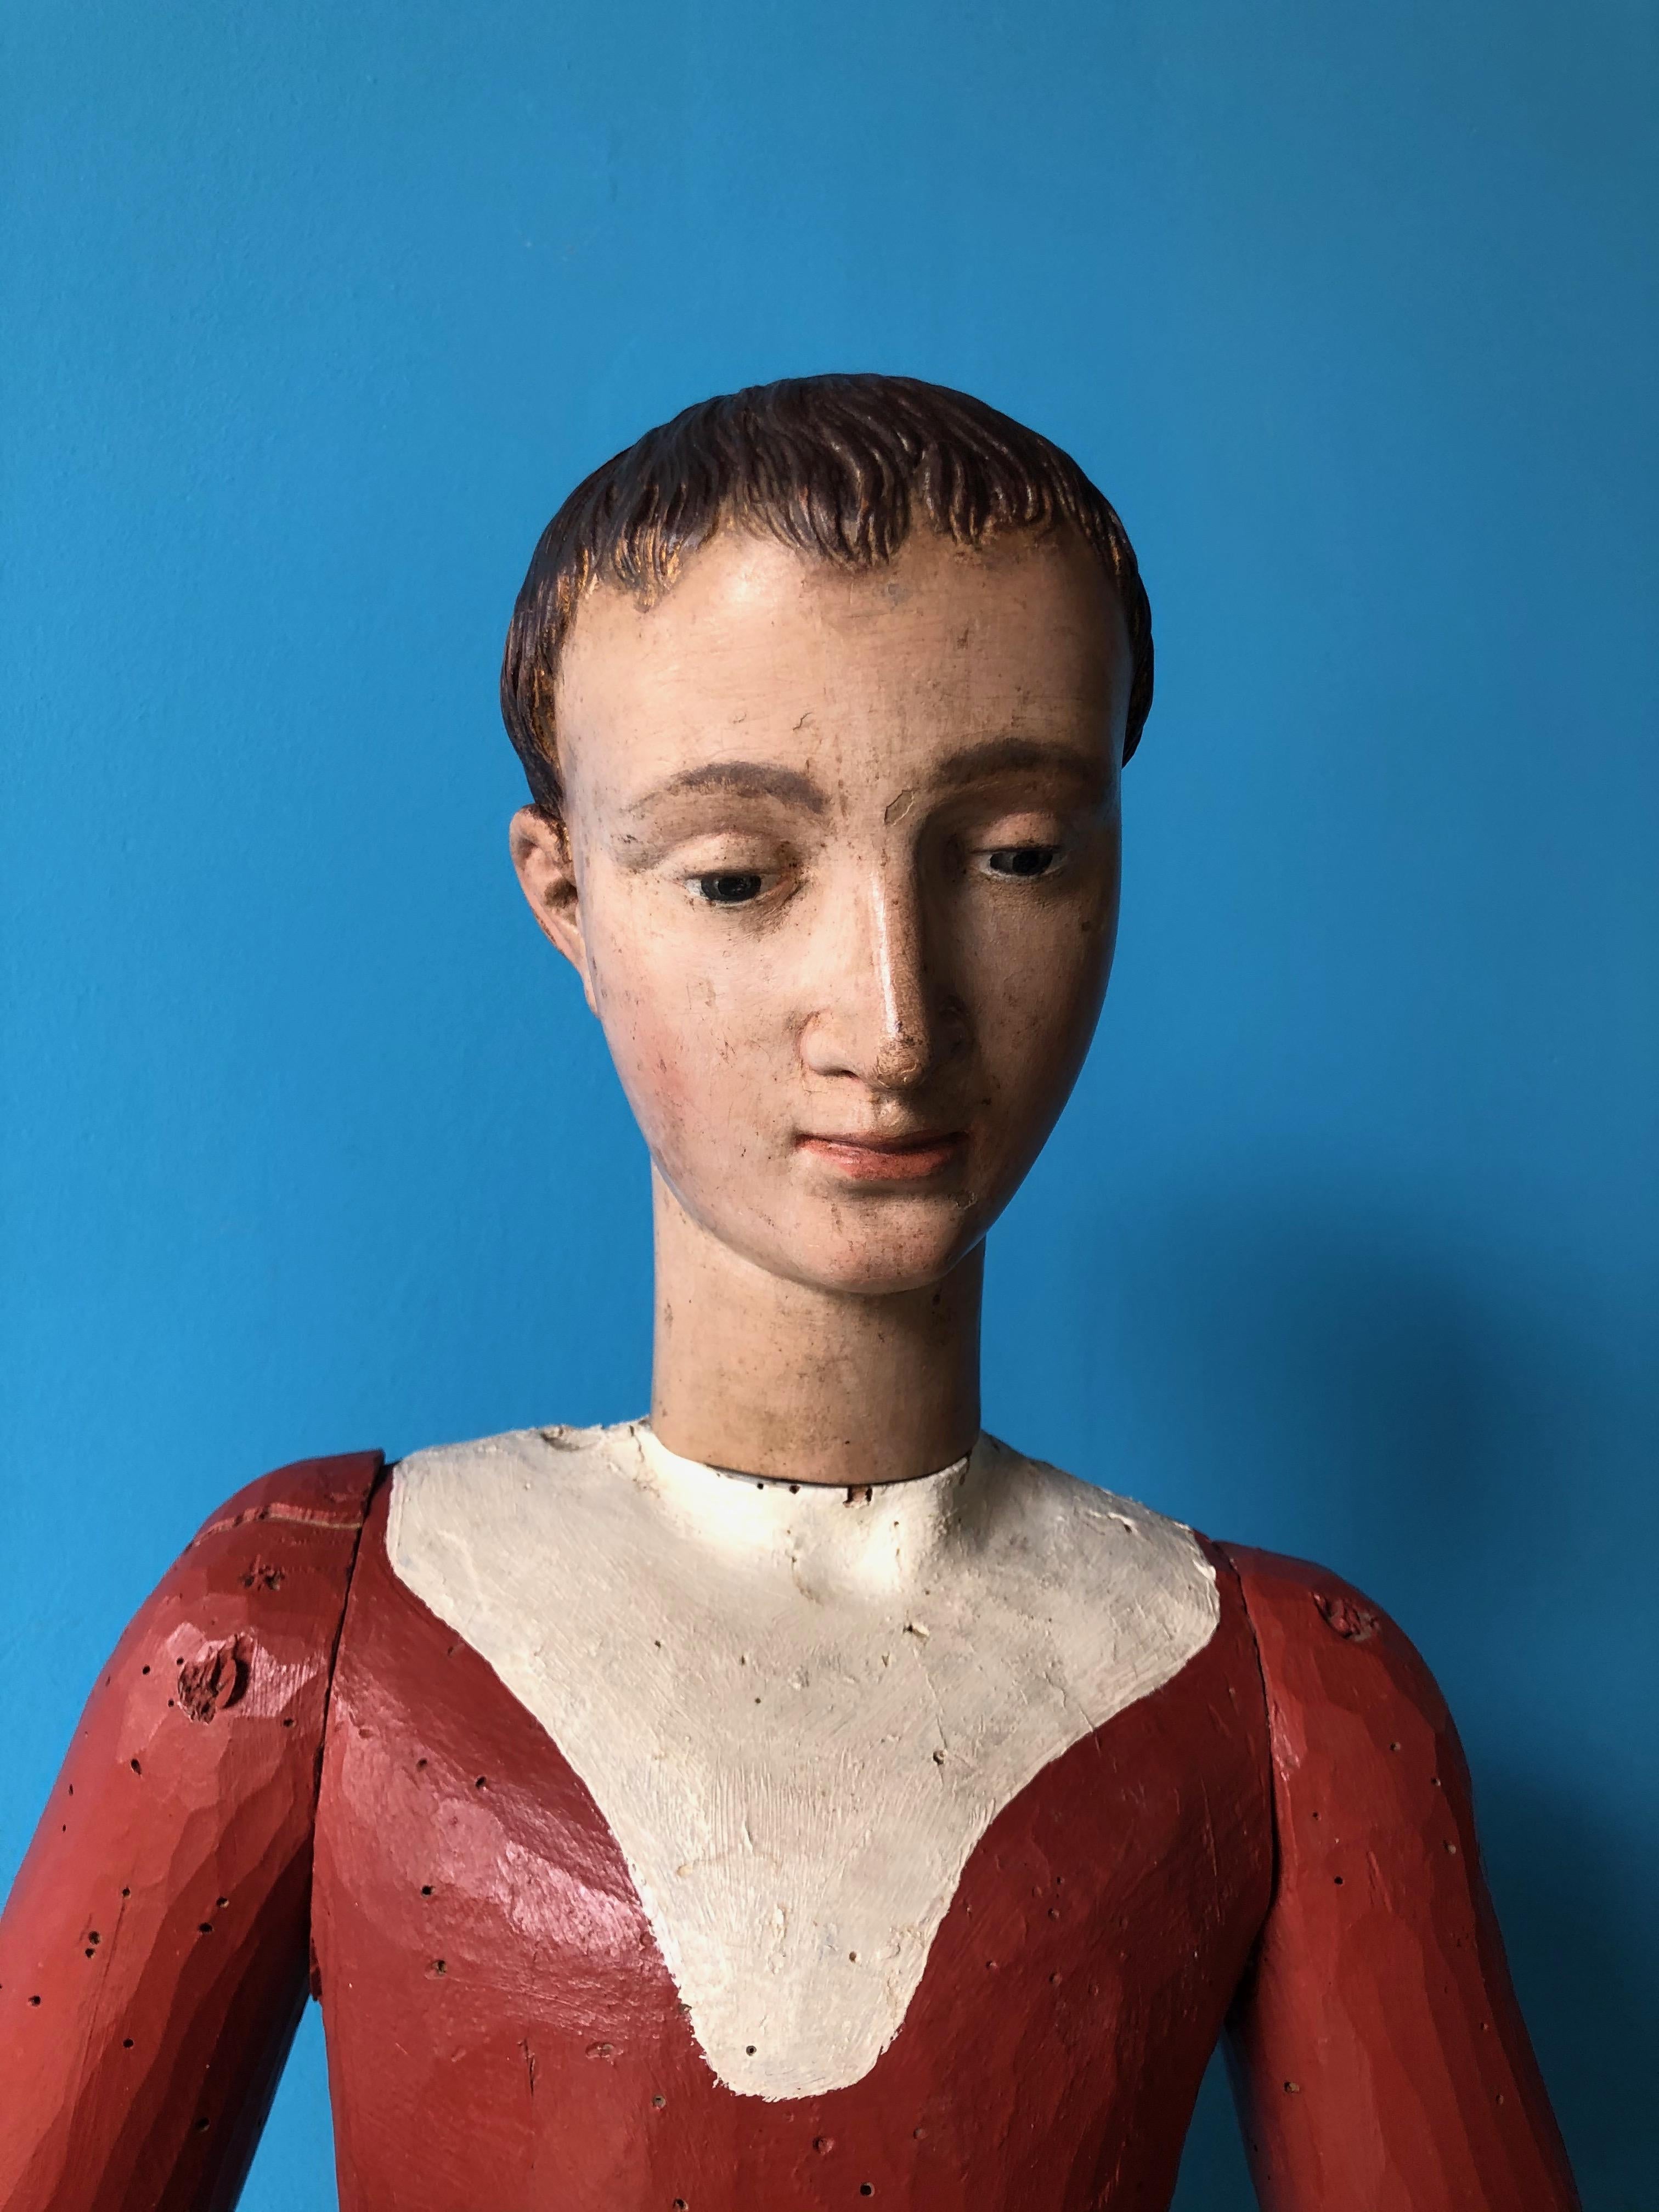 Youthful mannequin made of beech wood with original lacquer finish. Natural size, of Italian origin and realistically sculpted. The entire structure is well-proportioned, and of great quality. The face is truly a work of great cabinet-making, as the